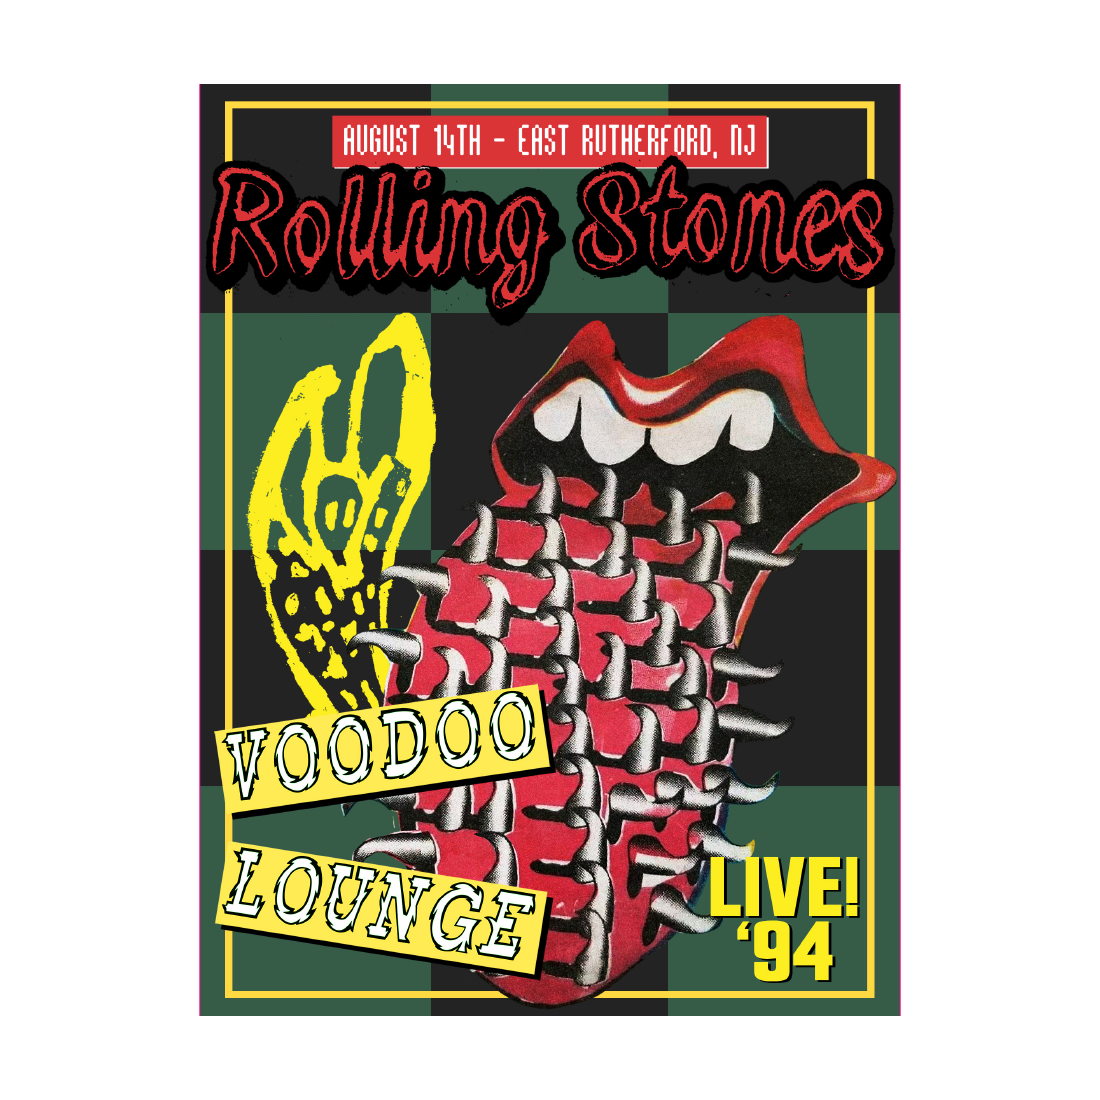 The Rolling Stones - Voodoo Lounge '94 NJ A2 Lithograph